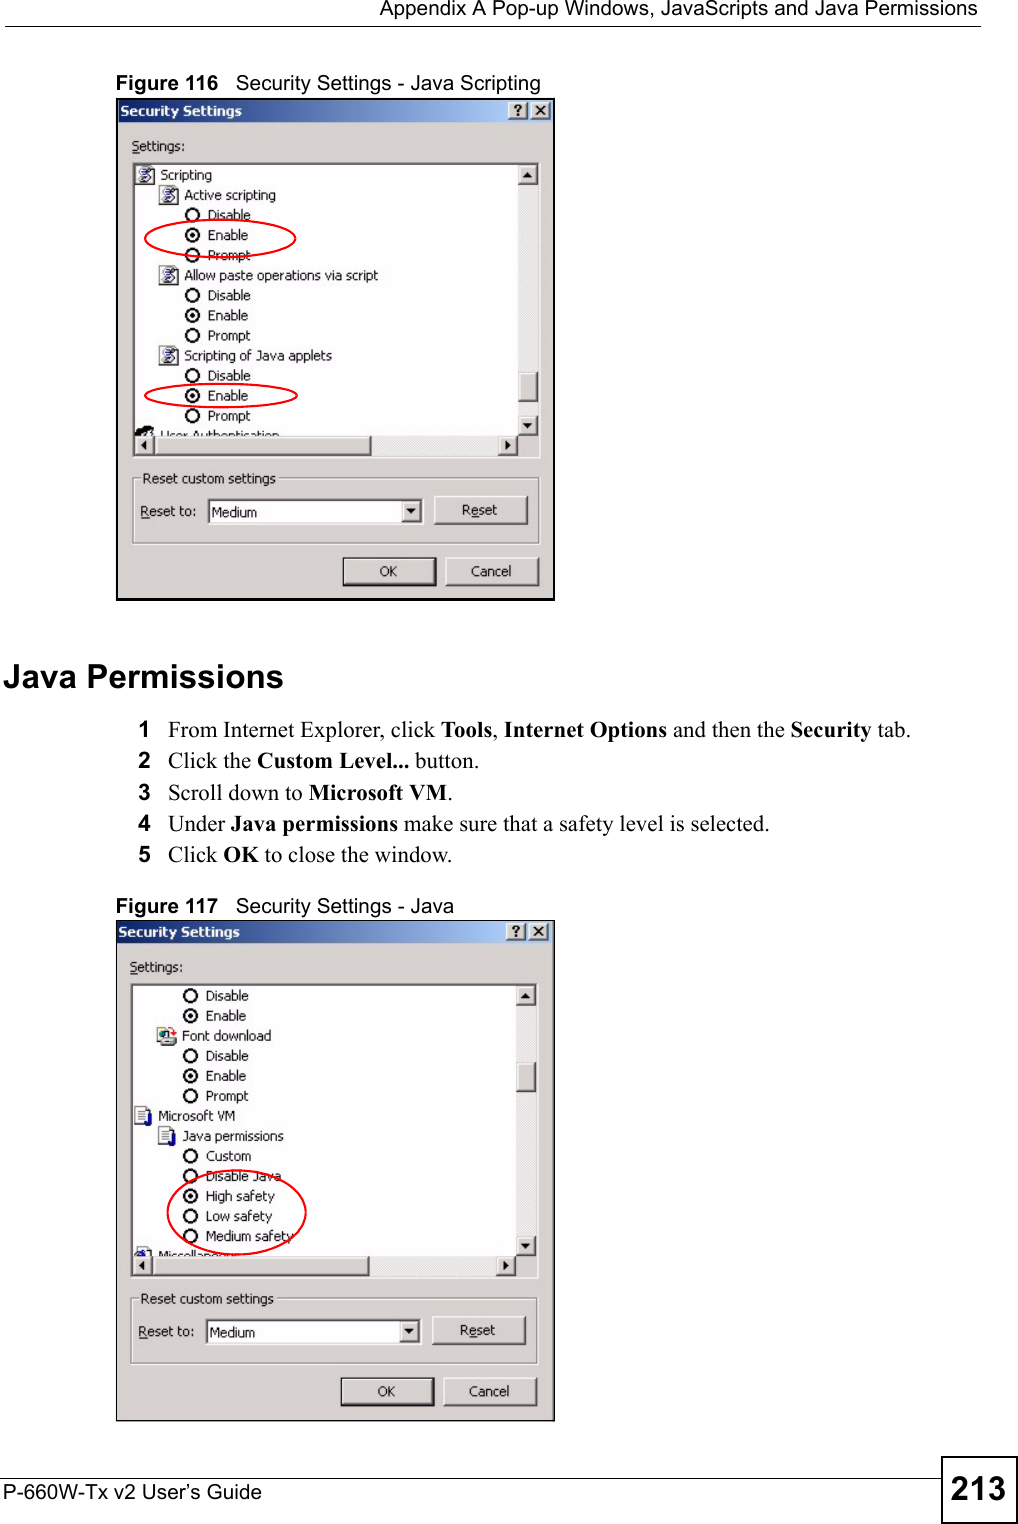  Appendix A Pop-up Windows, JavaScripts and Java PermissionsP-660W-Tx v2 User’s Guide 213Figure 116   Security Settings - Java ScriptingJava Permissions1From Internet Explorer, click Tools, Internet Options and then the Security tab. 2Click the Custom Level... button. 3Scroll down to Microsoft VM. 4Under Java permissions make sure that a safety level is selected.5Click OK to close the window.Figure 117   Security Settings - Java 